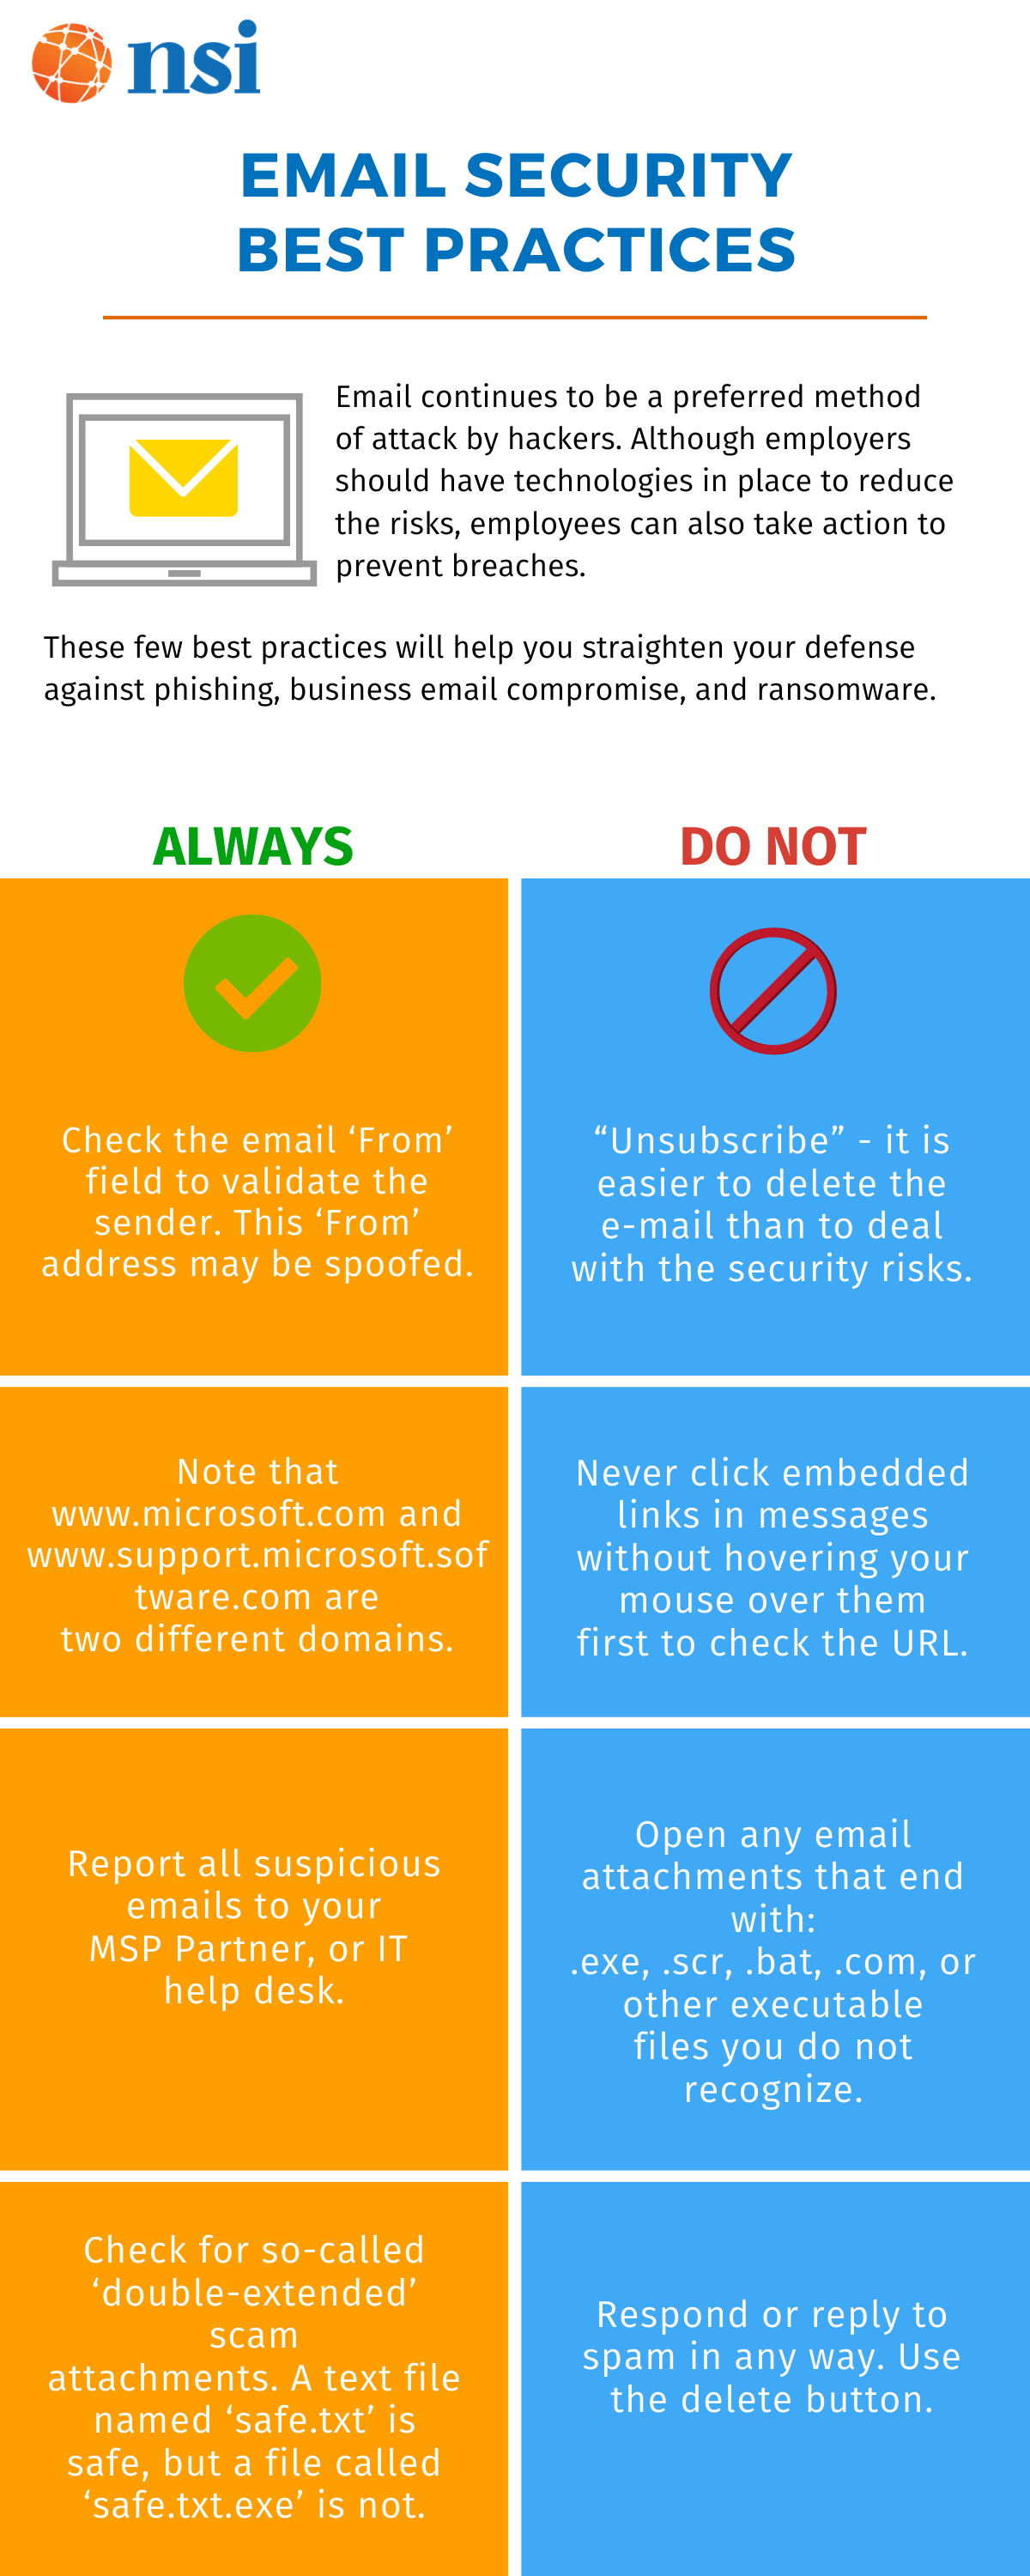 Email Security Best Practices - NSI